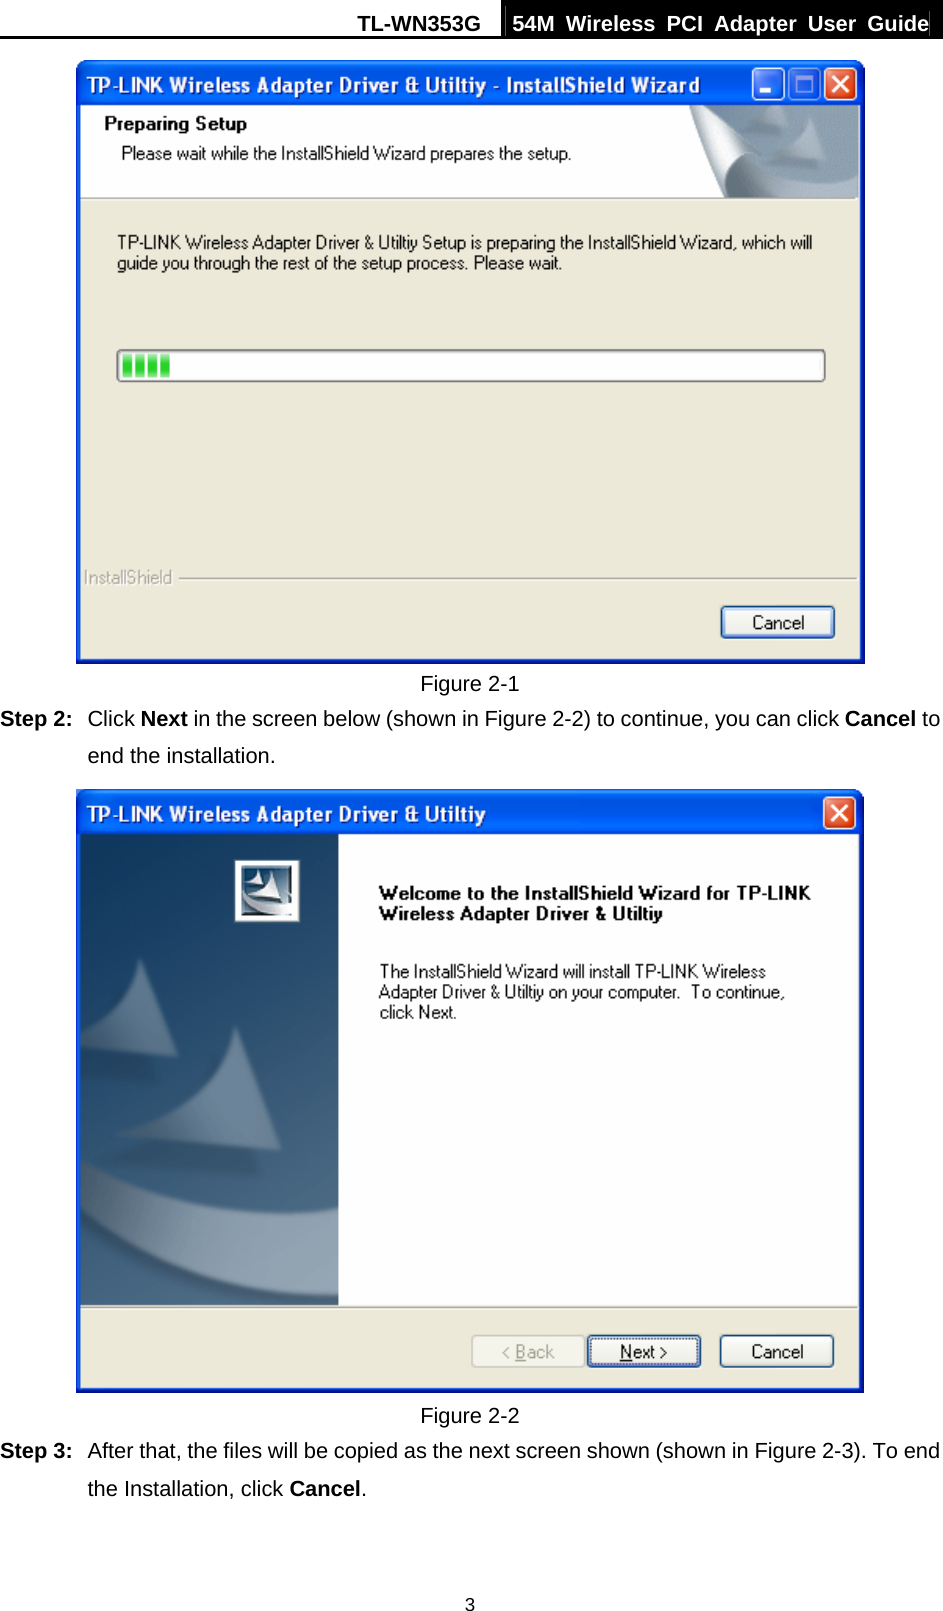 TL-WN353G  54M Wireless PCI Adapter User Guide   3 Figure 2-1 Step 2:  Click Next in the screen below (shown in Figure 2-2) to continue, you can click Cancel to end the installation.  Figure 2-2 Step 3:  After that, the files will be copied as the next screen shown (shown in Figure 2-3). To end the Installation, click Cancel. 